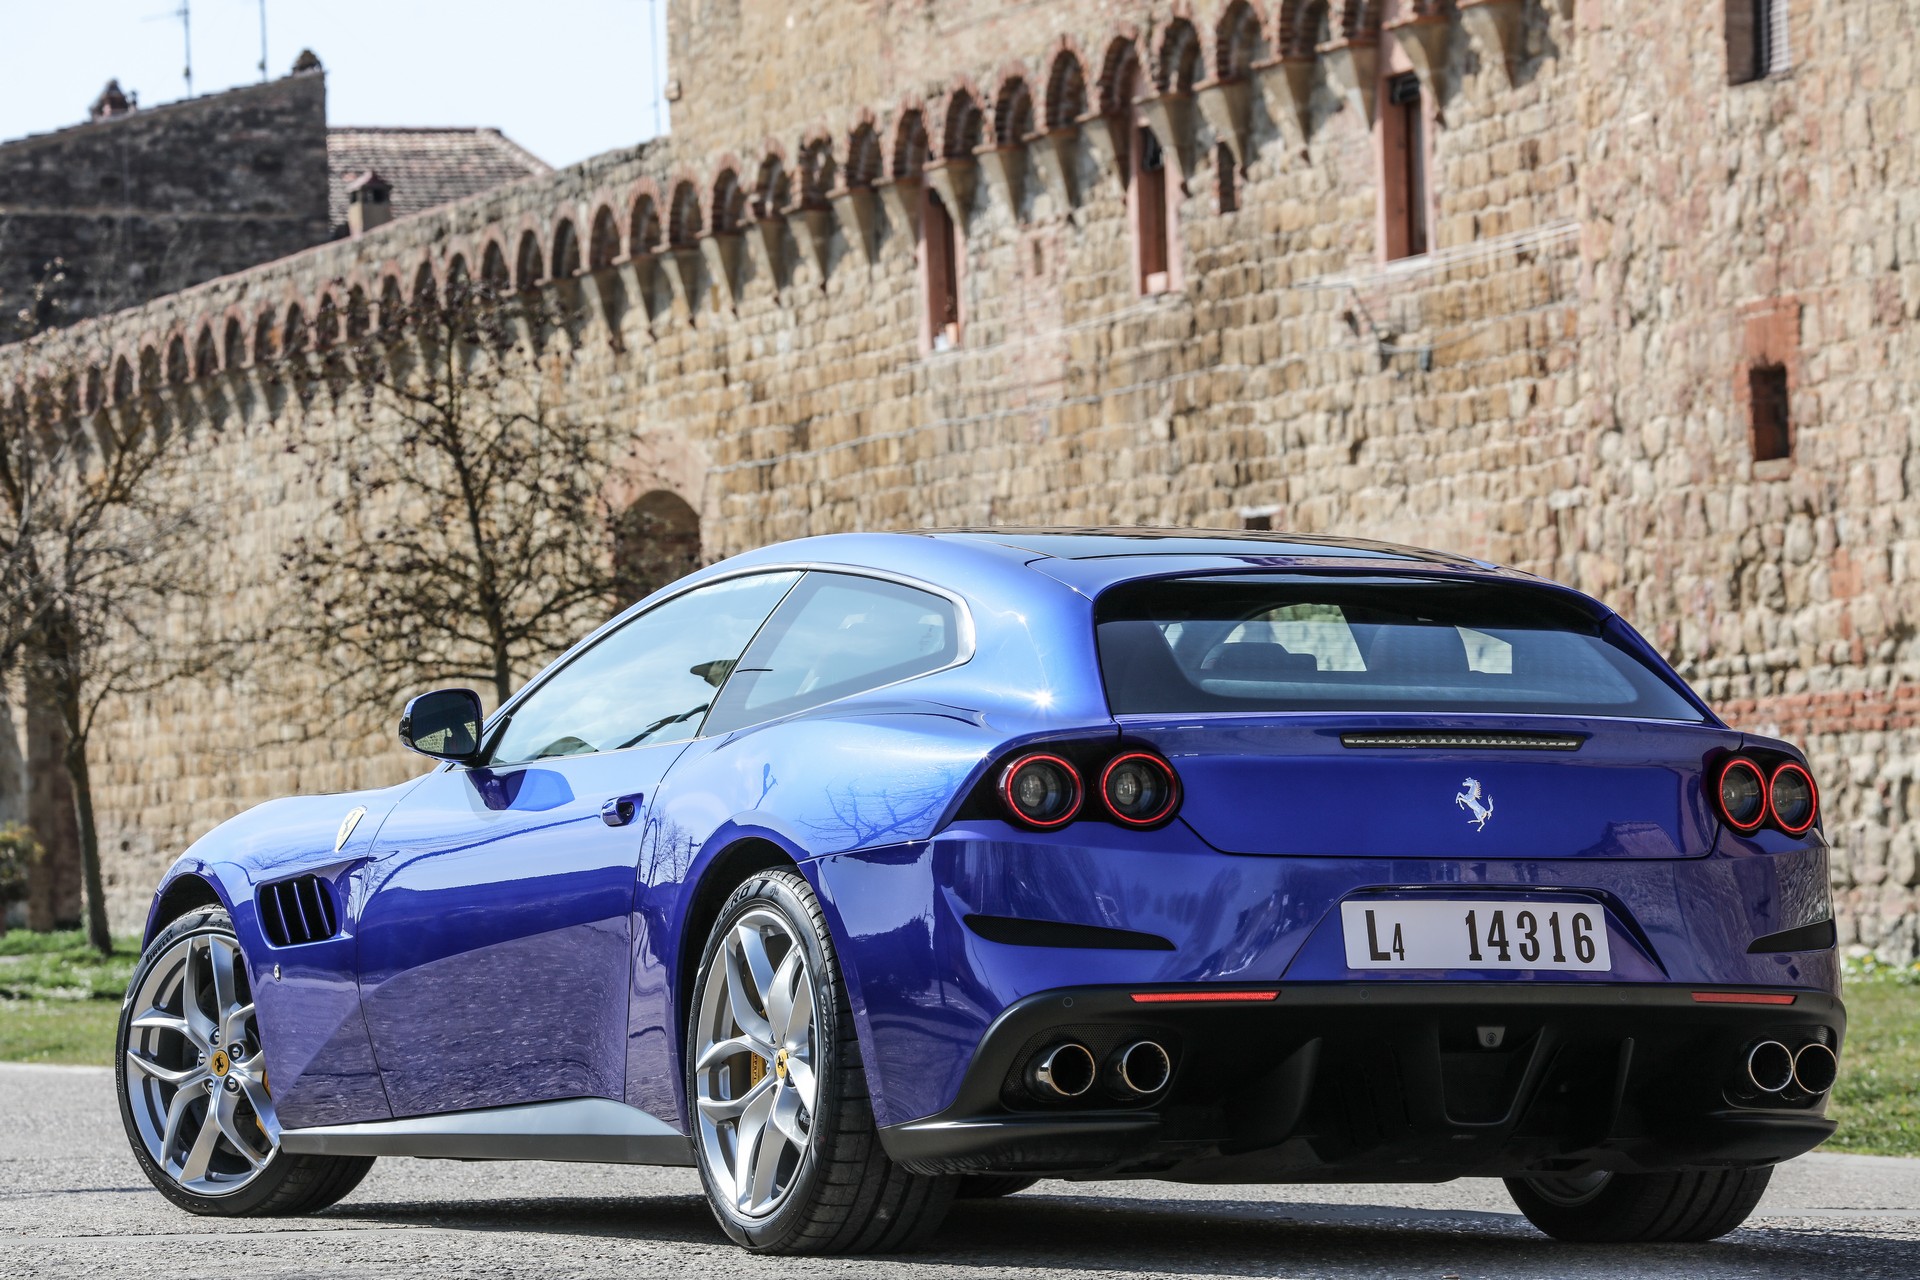 Ferrari Drops The GTC4Lusso And GTC4Lusso T From Its Range | Carscoops